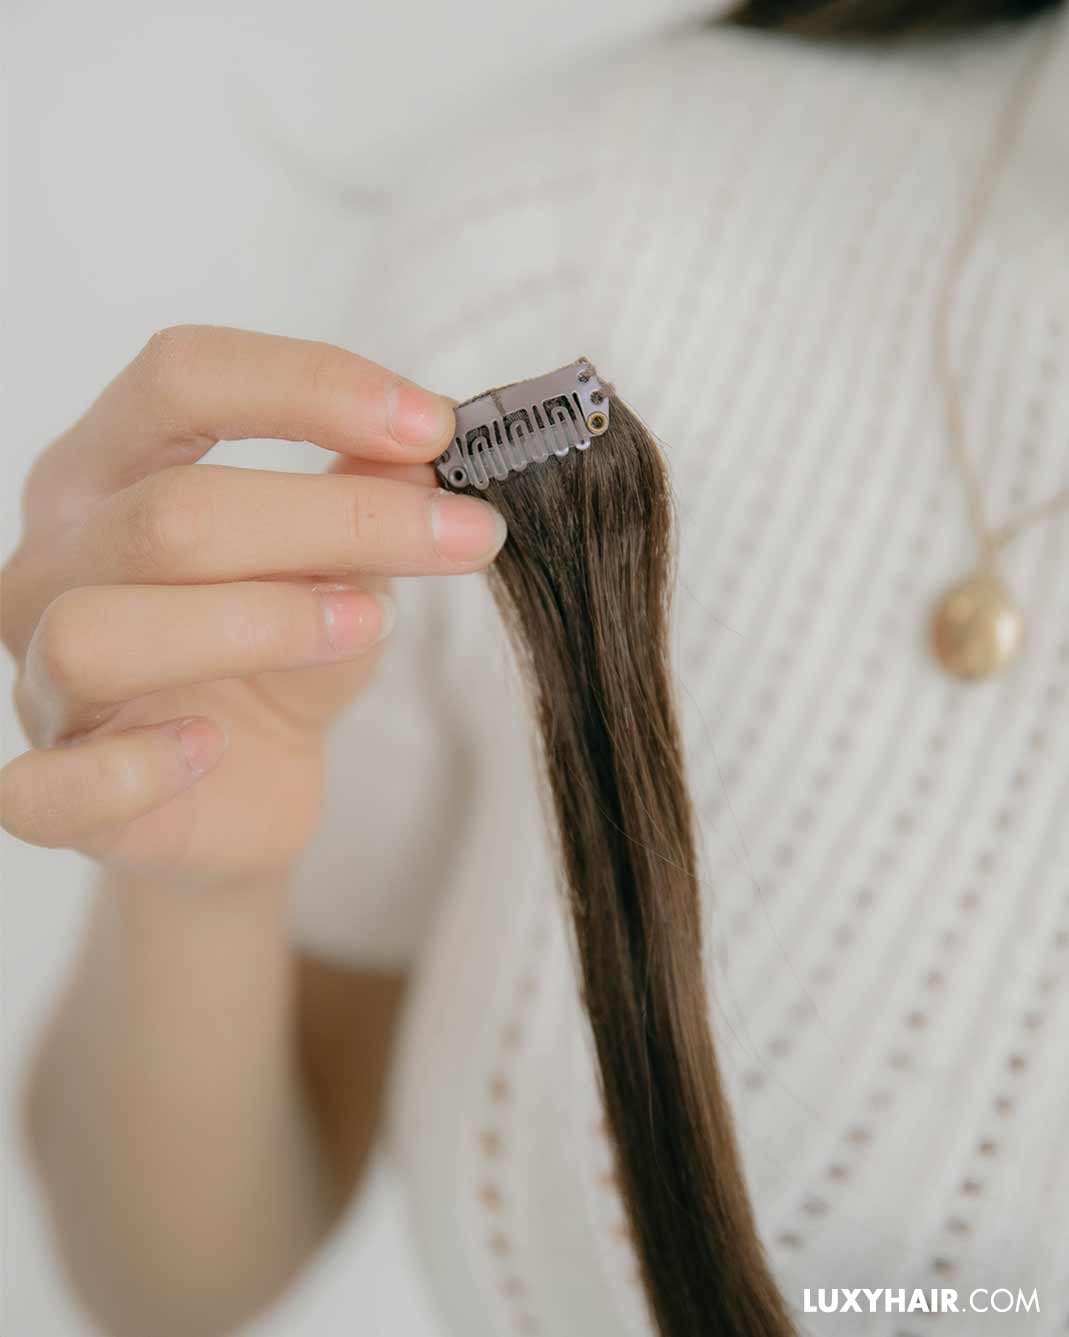 Classic hair extensions